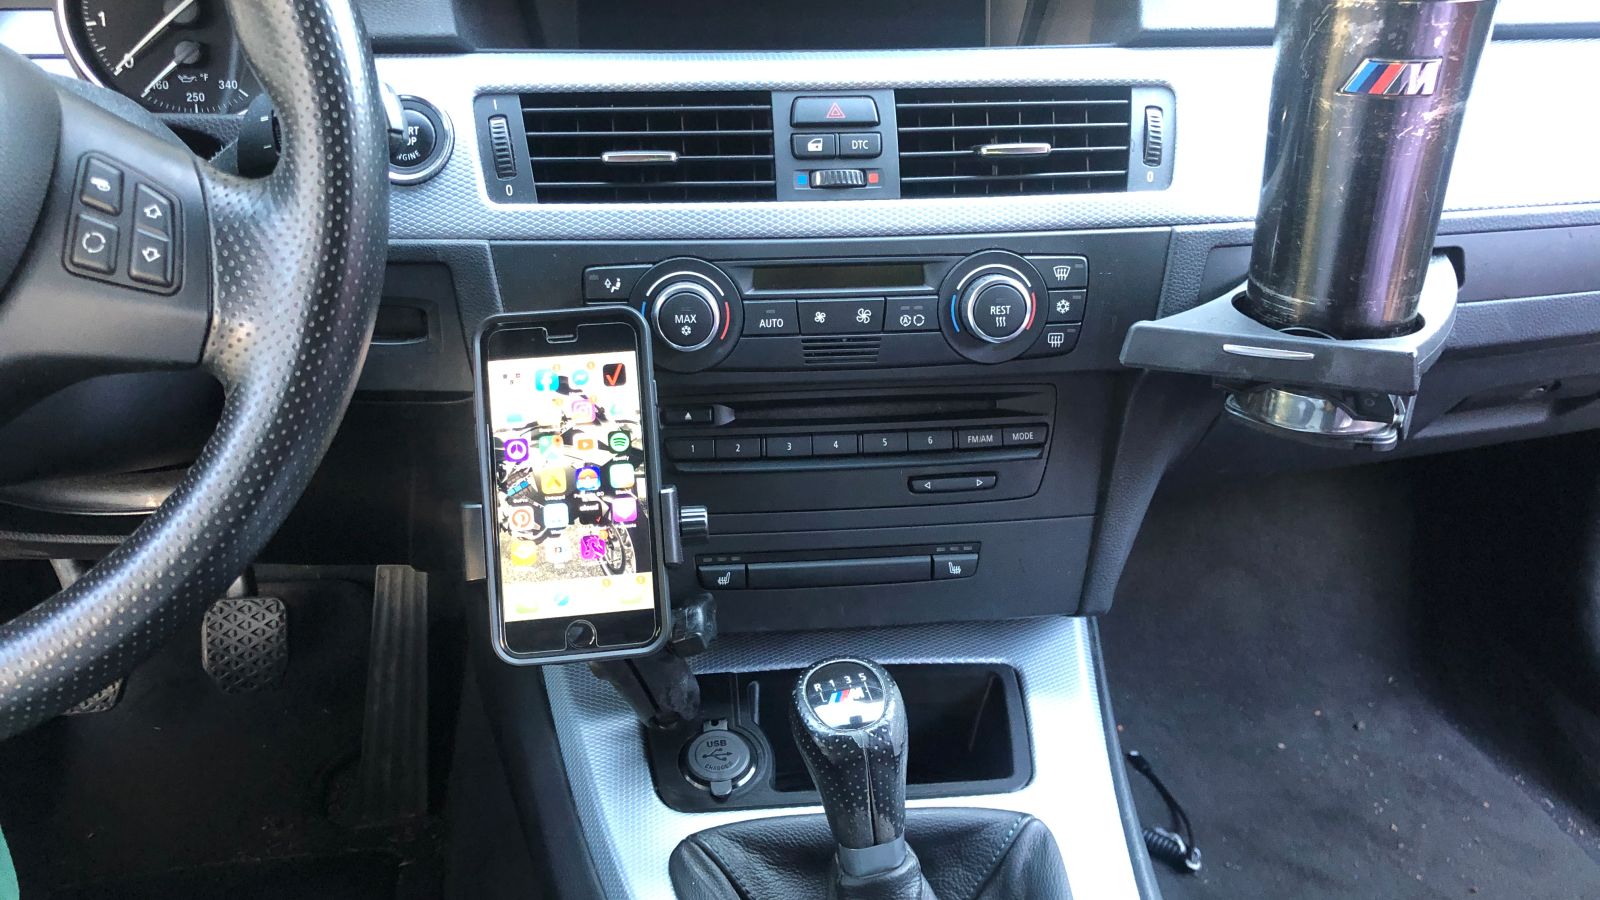 Illustration for article titled Final iteration of the E9X phone holder has been installed into my car